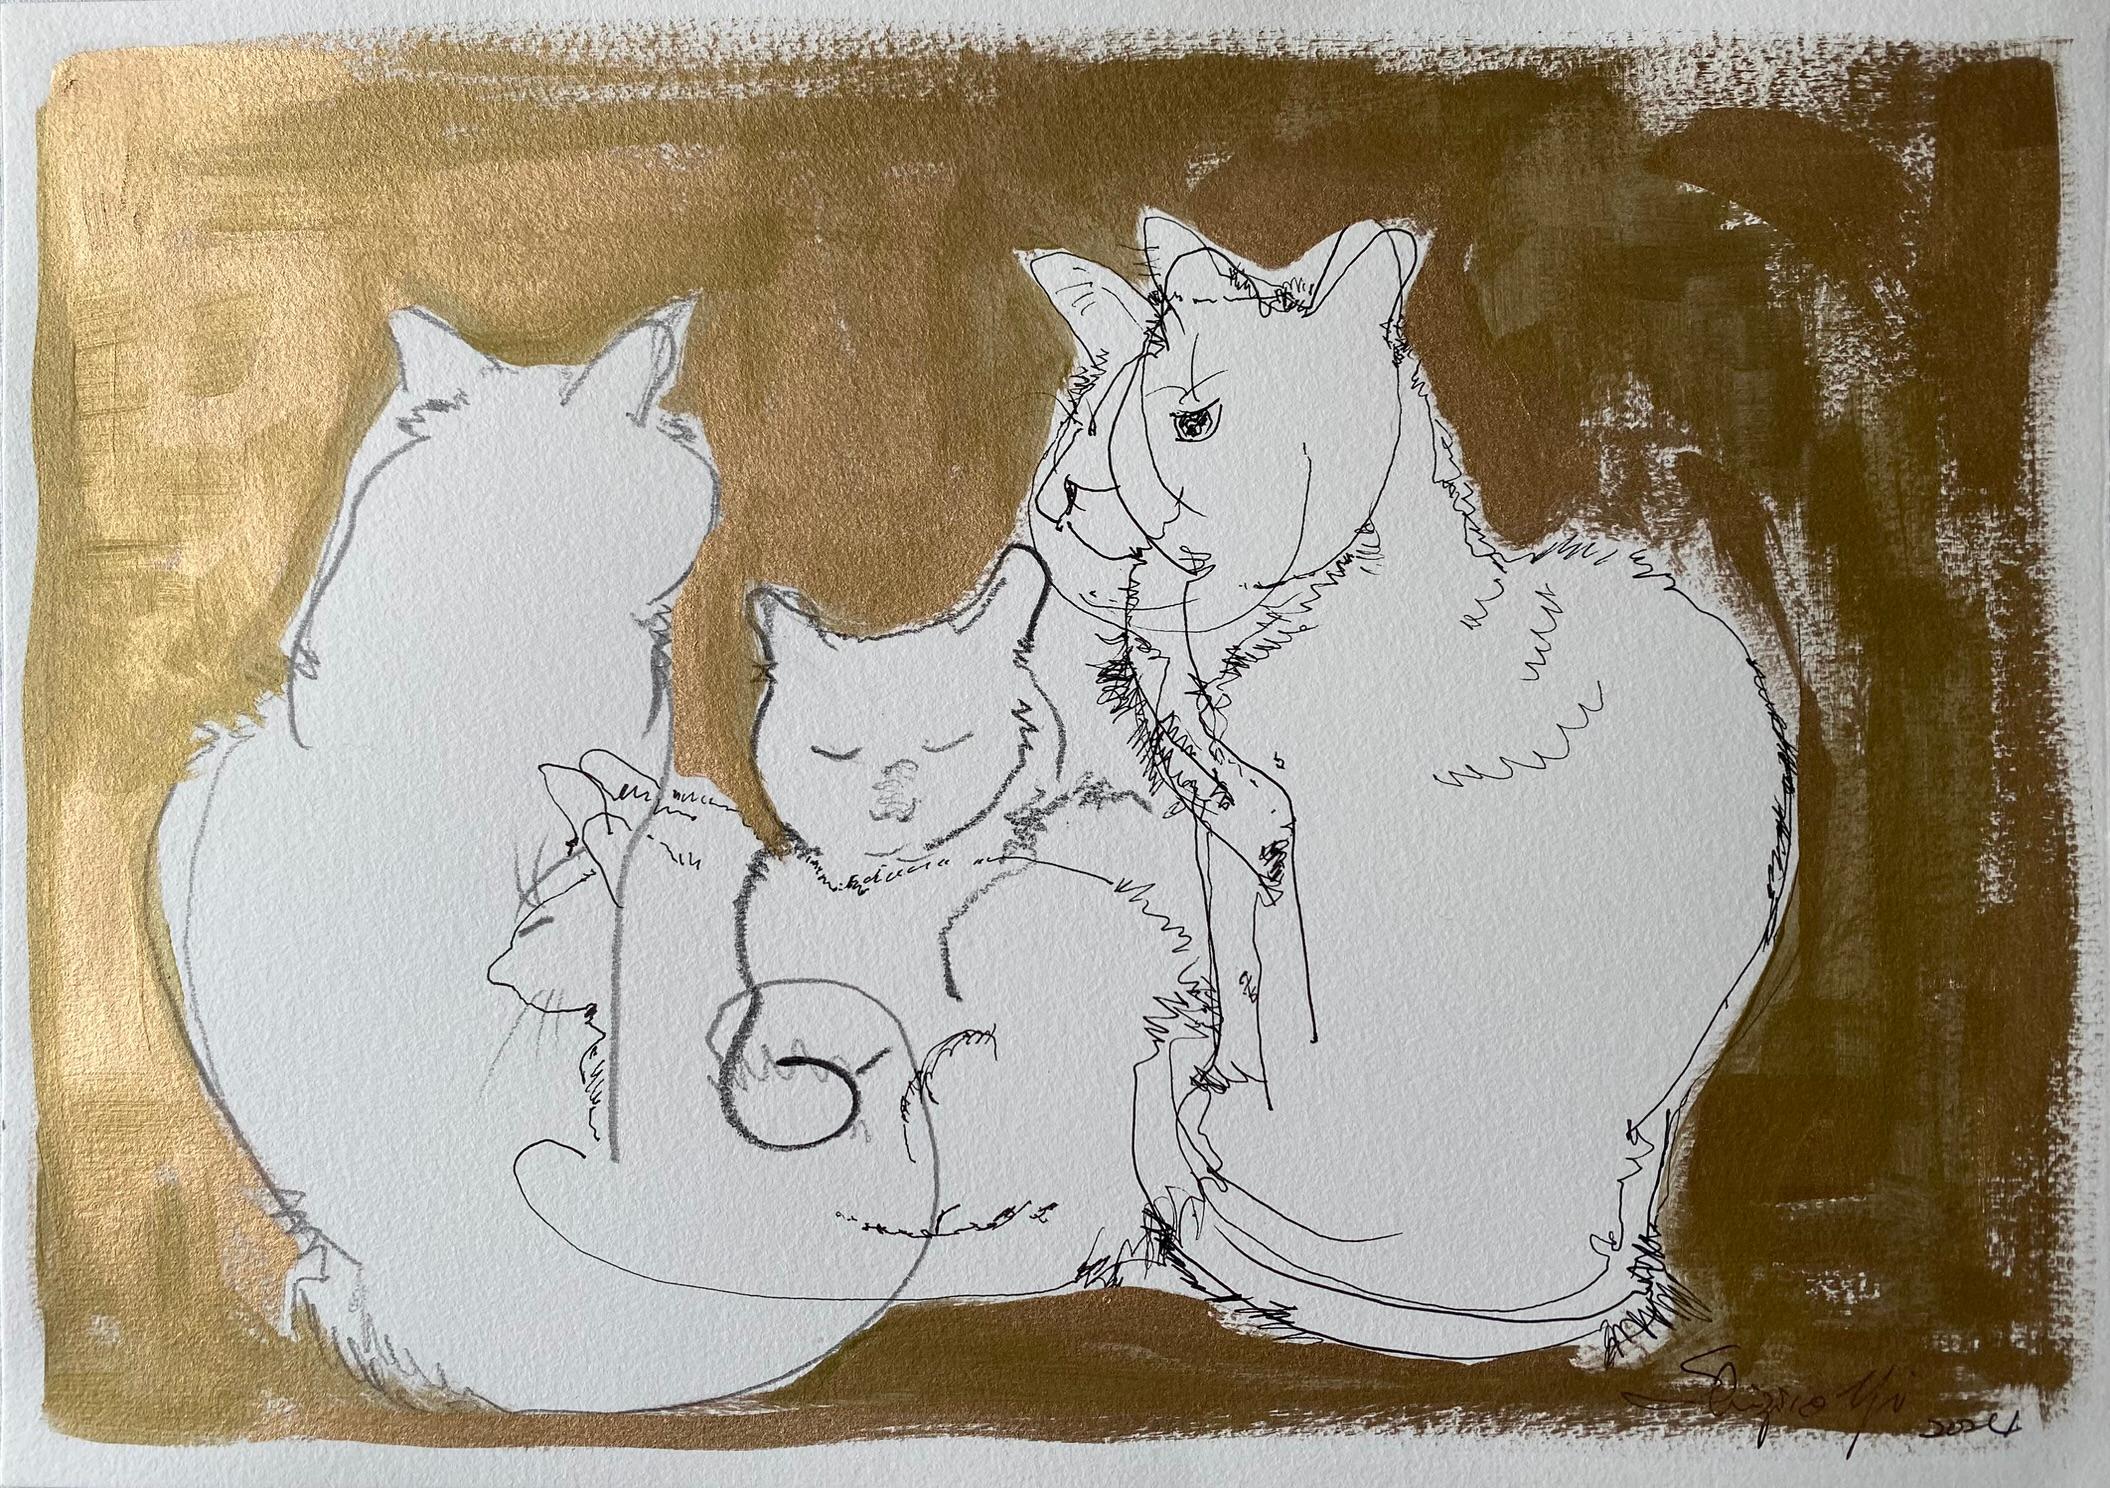 Original Set-Breakfast with Cat Series-British Award Artist-Gold, ink on papers For Sale 5